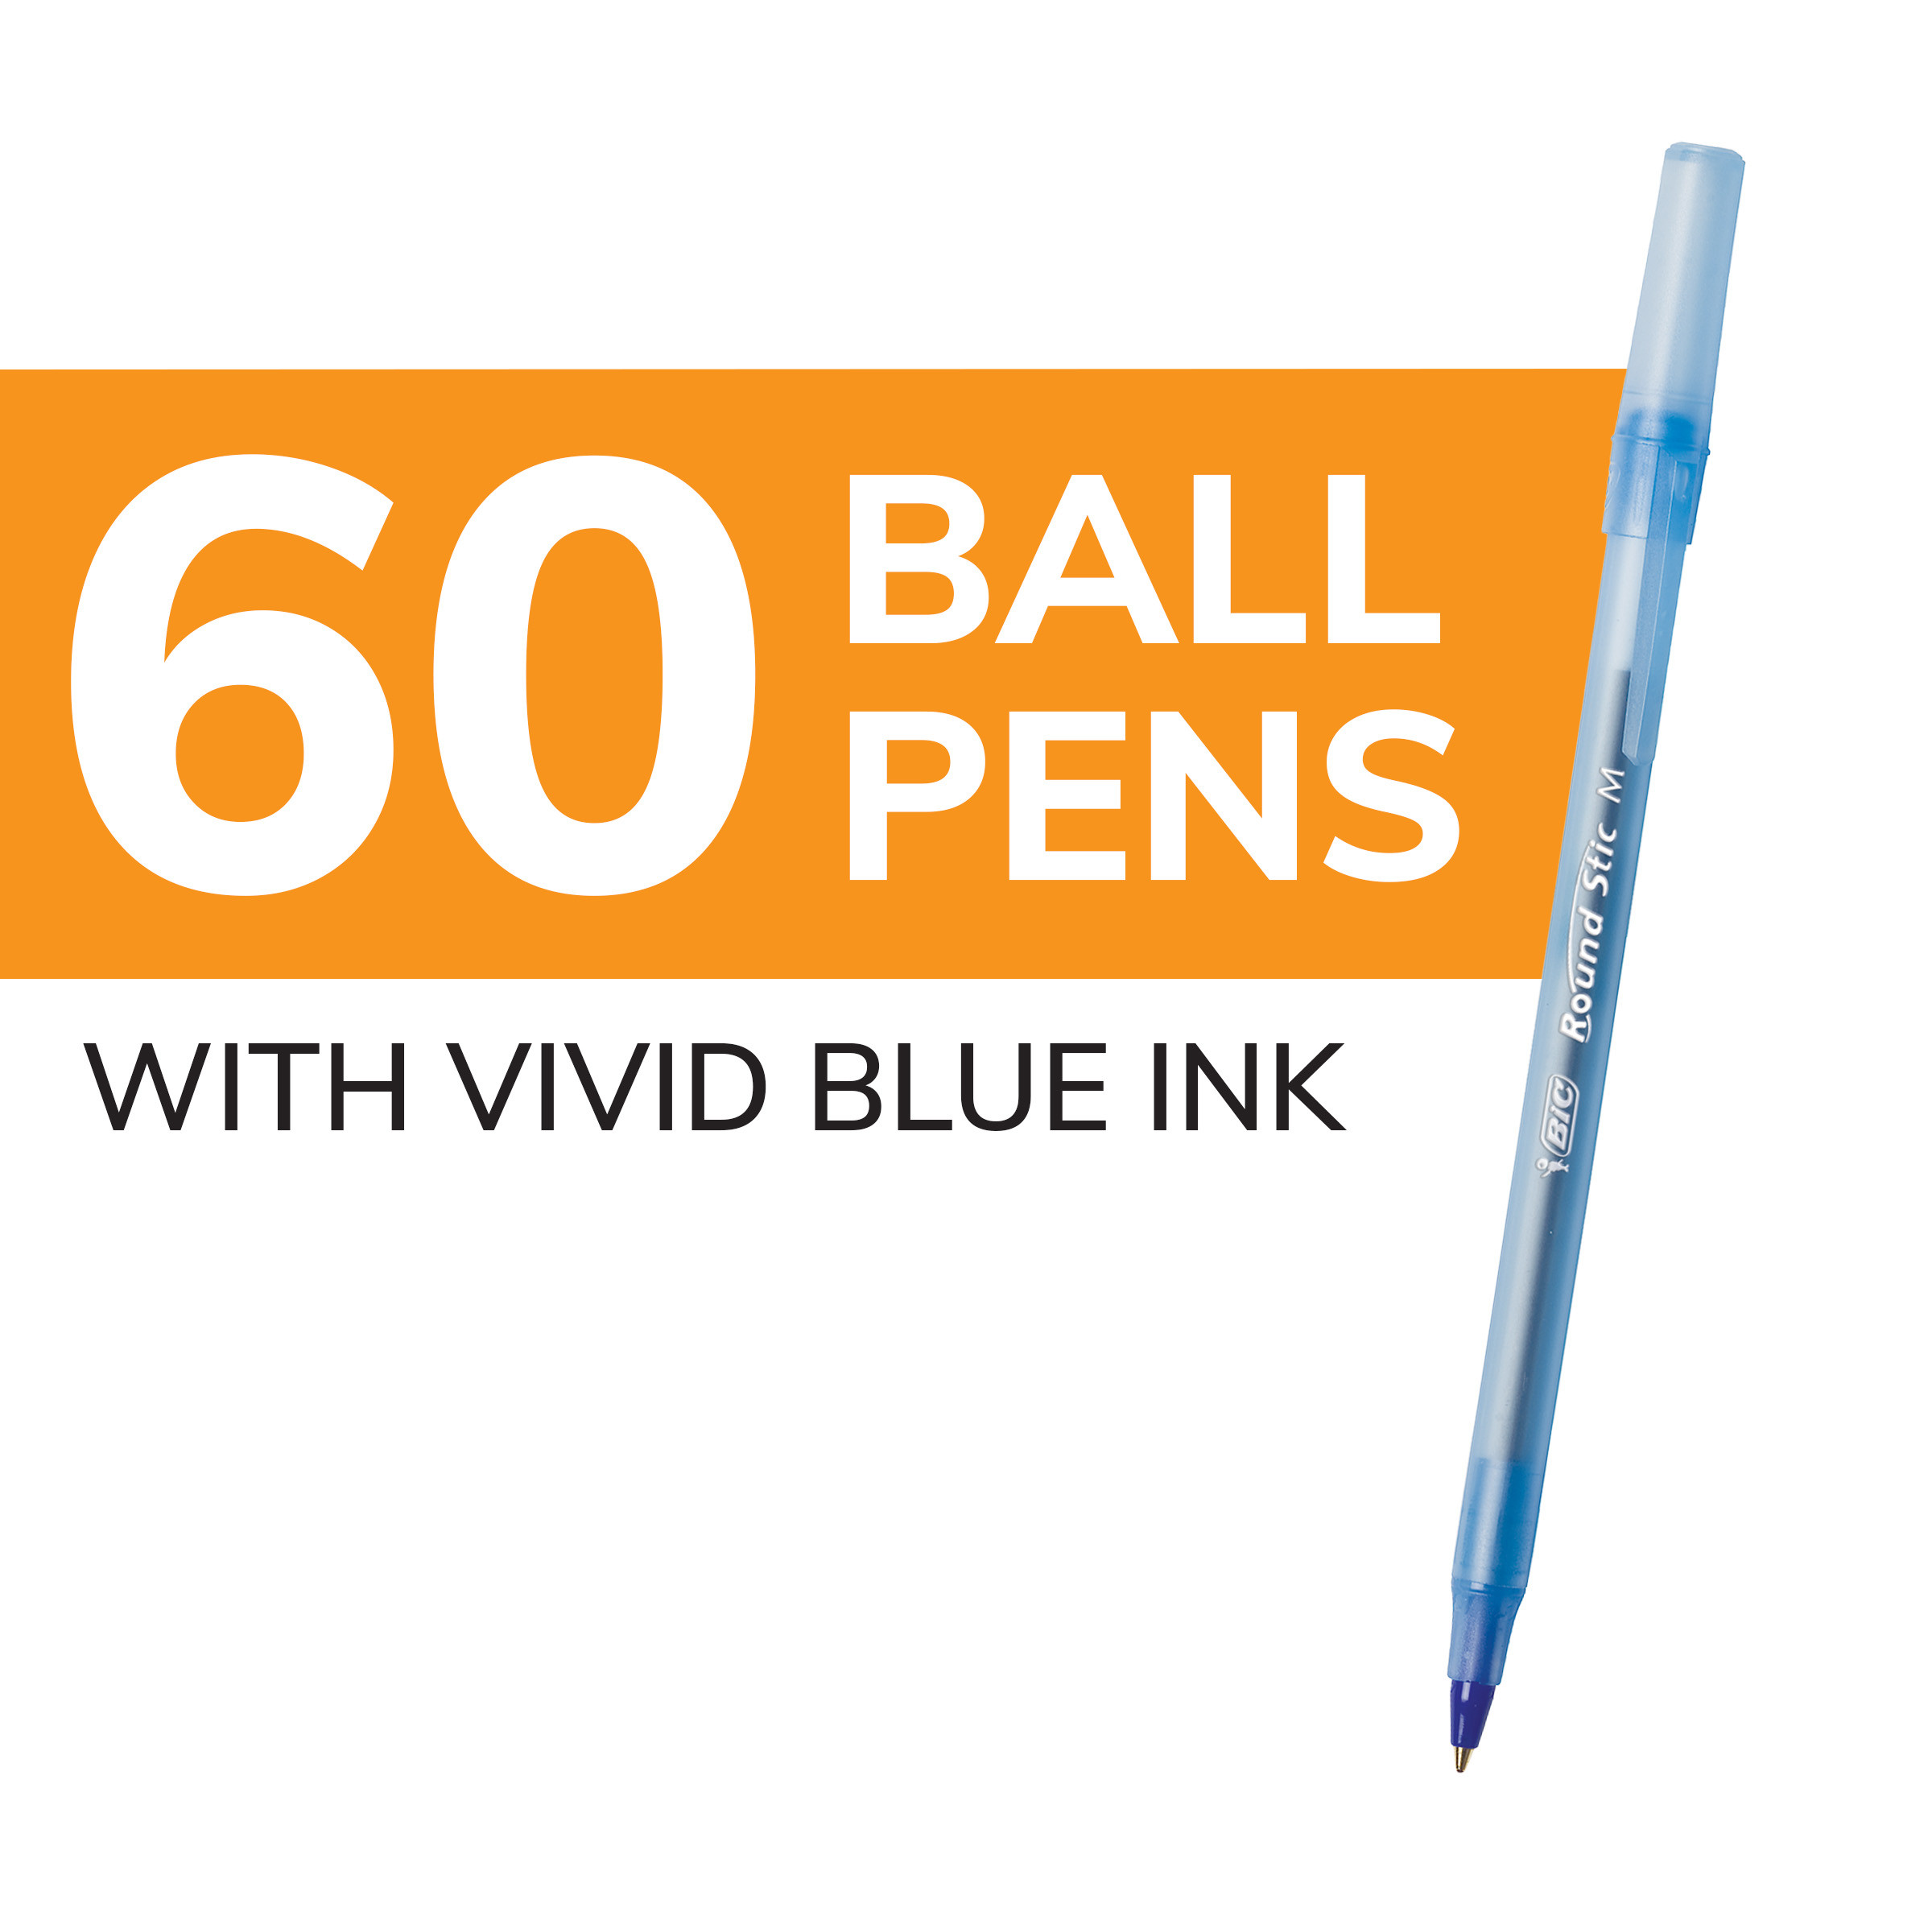 BIC Round Stic Xtra Life Ballpoint Pens, Medium Point (1.0mm), Blue, 60 Count - image 3 of 9